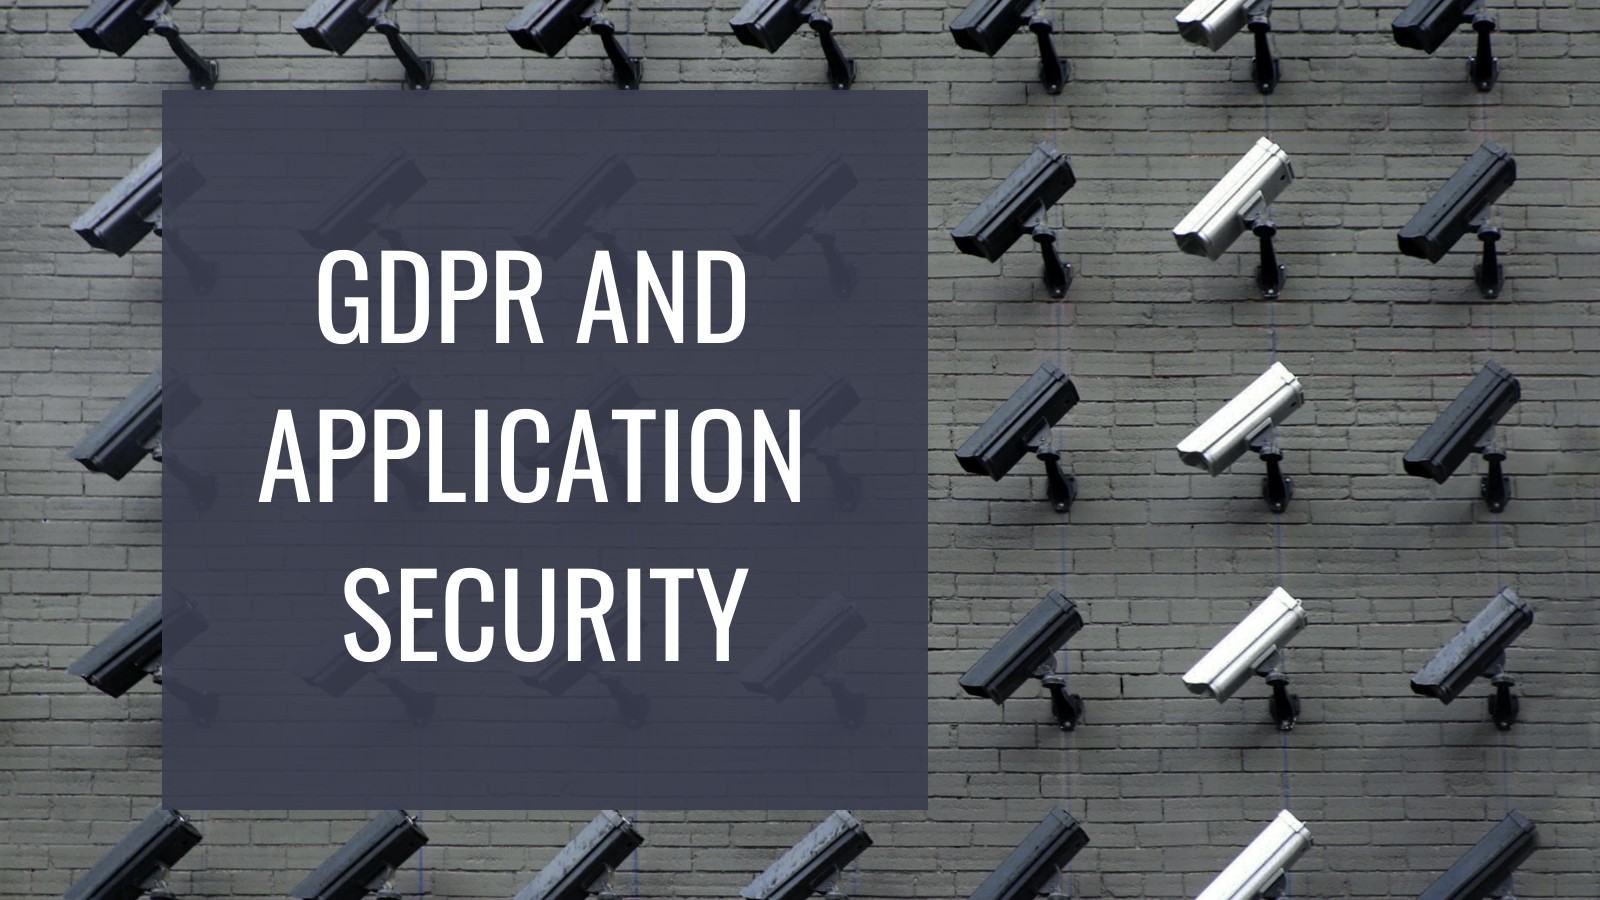 The Benefits of GDPR for Application Security